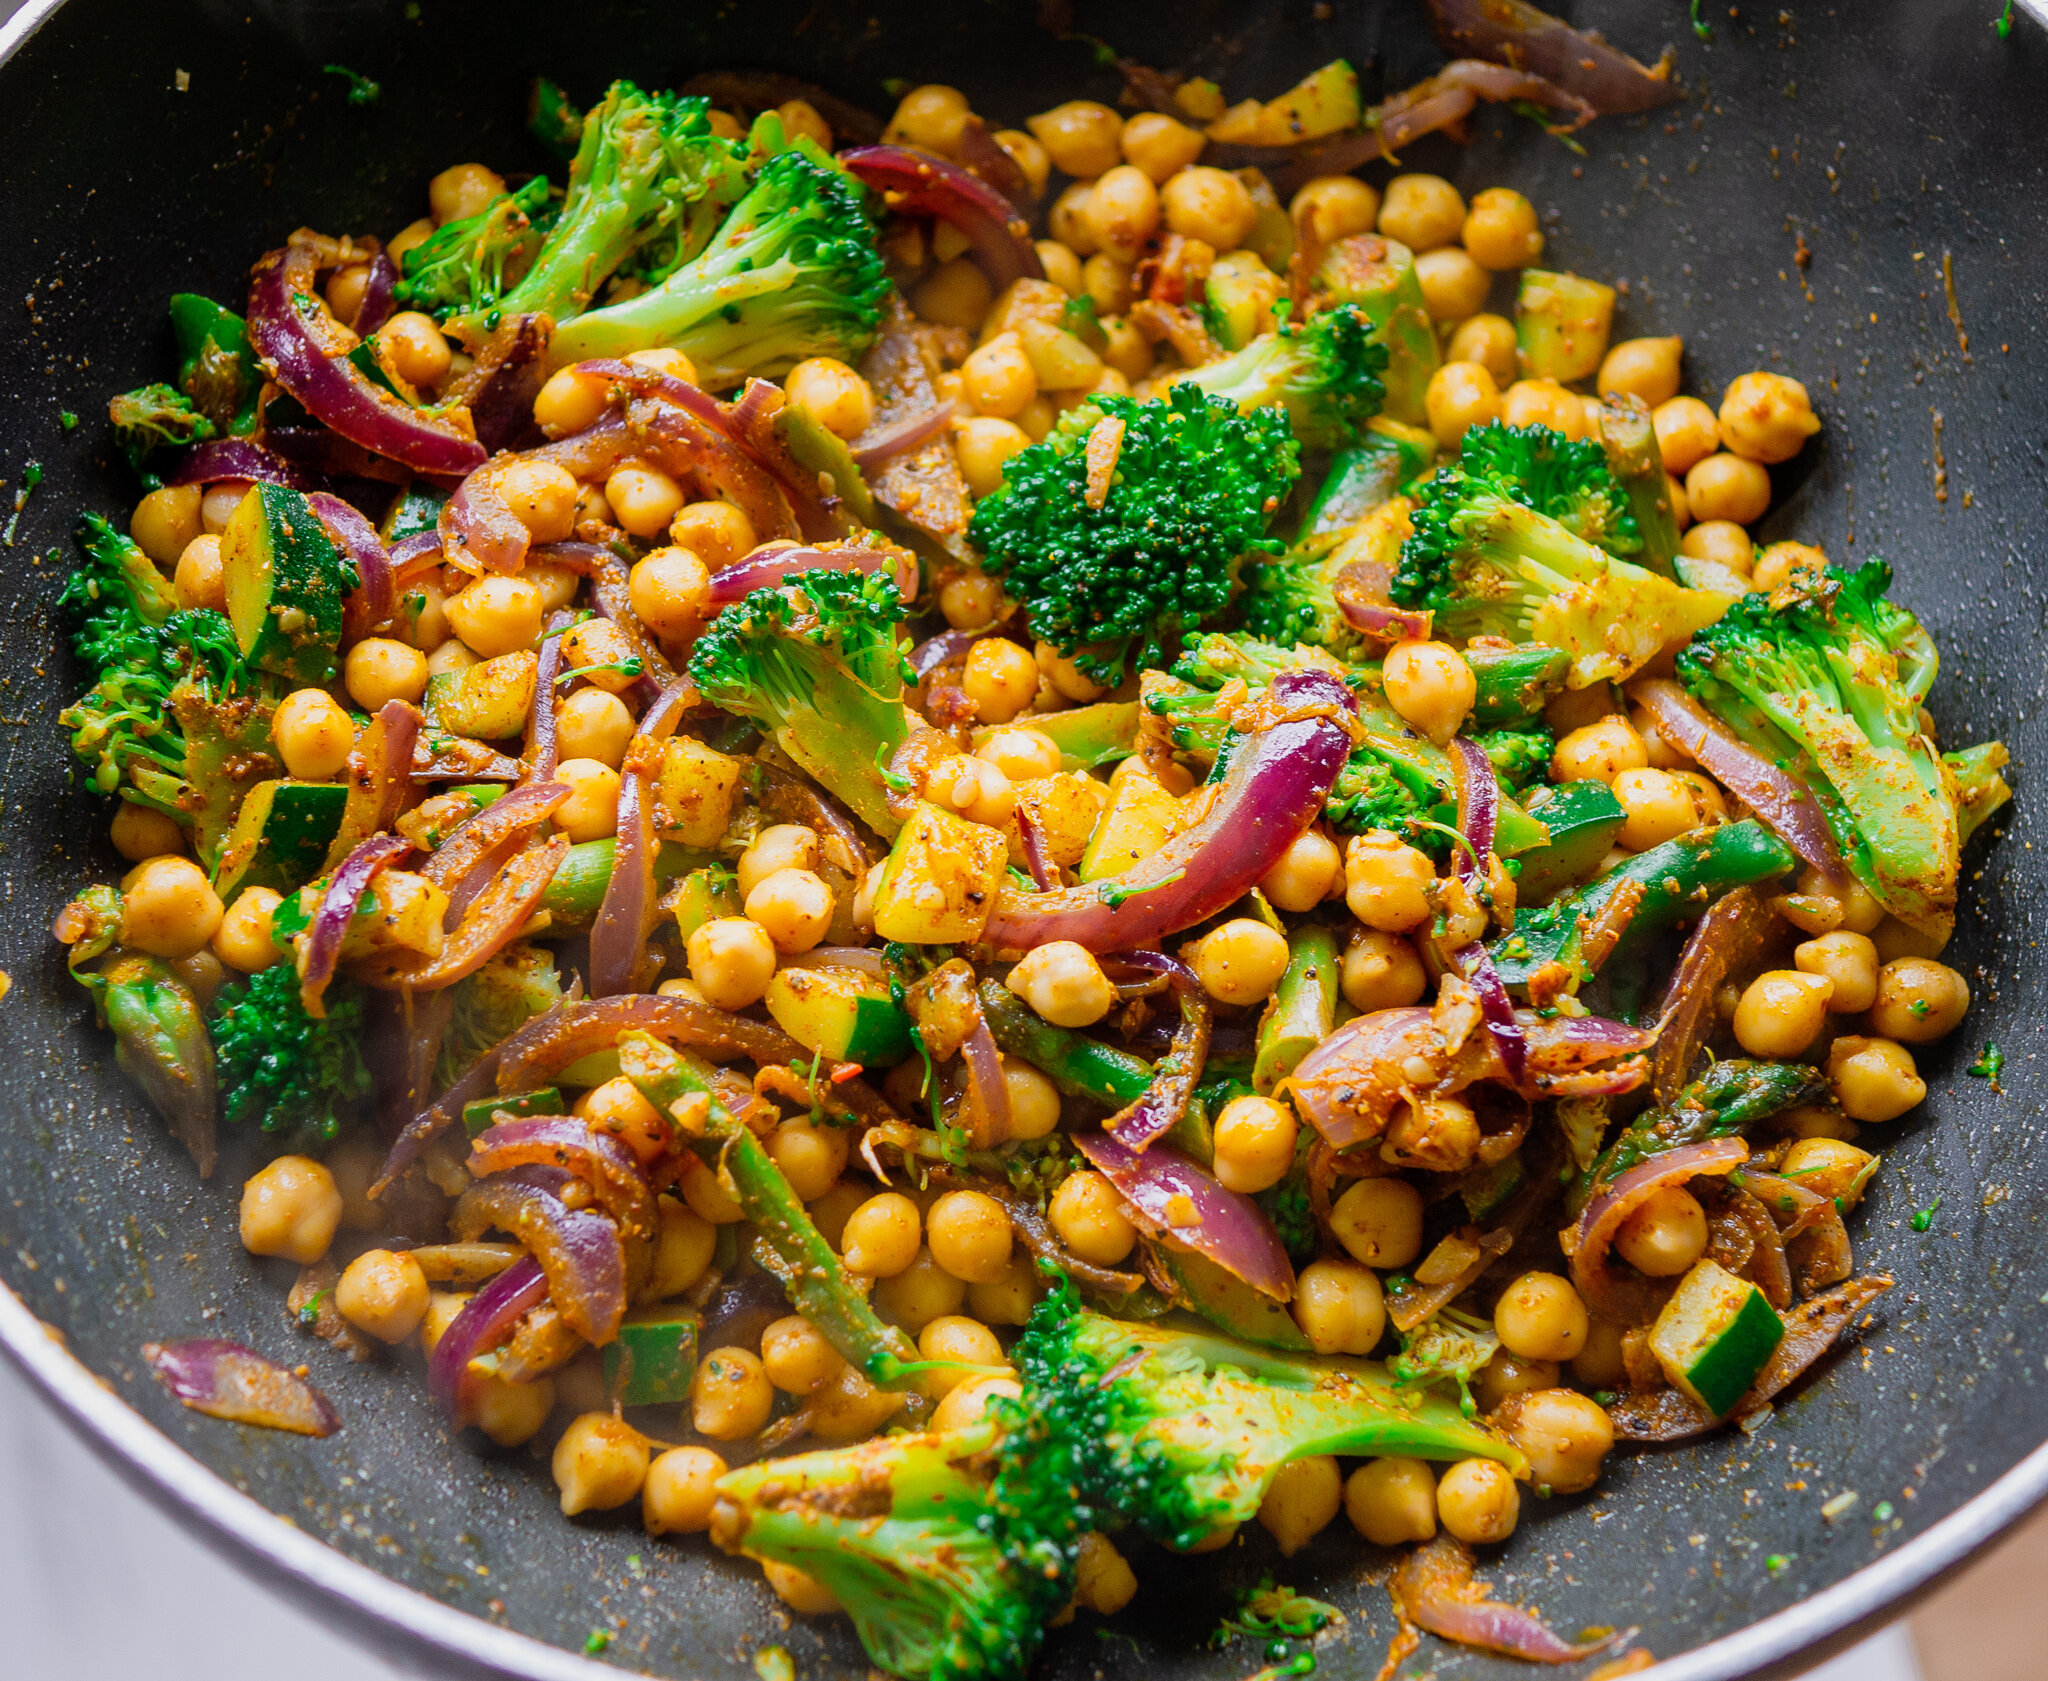  Spiced chickpeas for salad by Kam Sokhi mind body &amp; eatingcoach 